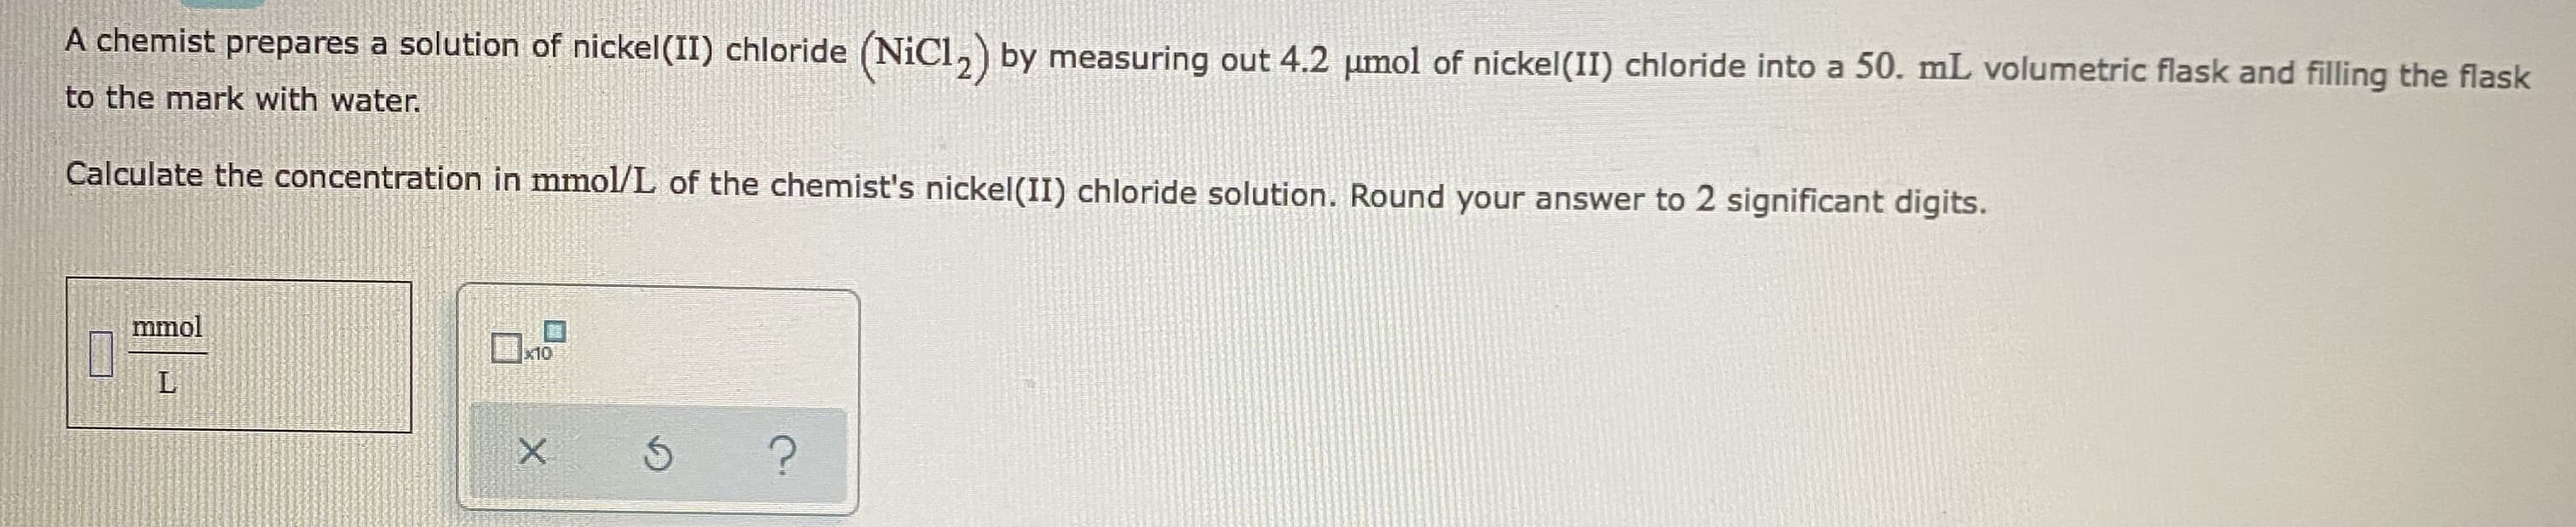 A chemist prepares a solution of nickel(II) chloride (NiCl,) by measuring out 4.2 umol of nickel(II) chloride into a 50. mL volumetric flask and filling the flask
to the mark with water.
Calculate the concentration in mmol/L of the chemist's nickel(II) chloride solution. Round your answer to 2 significant digits.
mmol
ロ
x10
